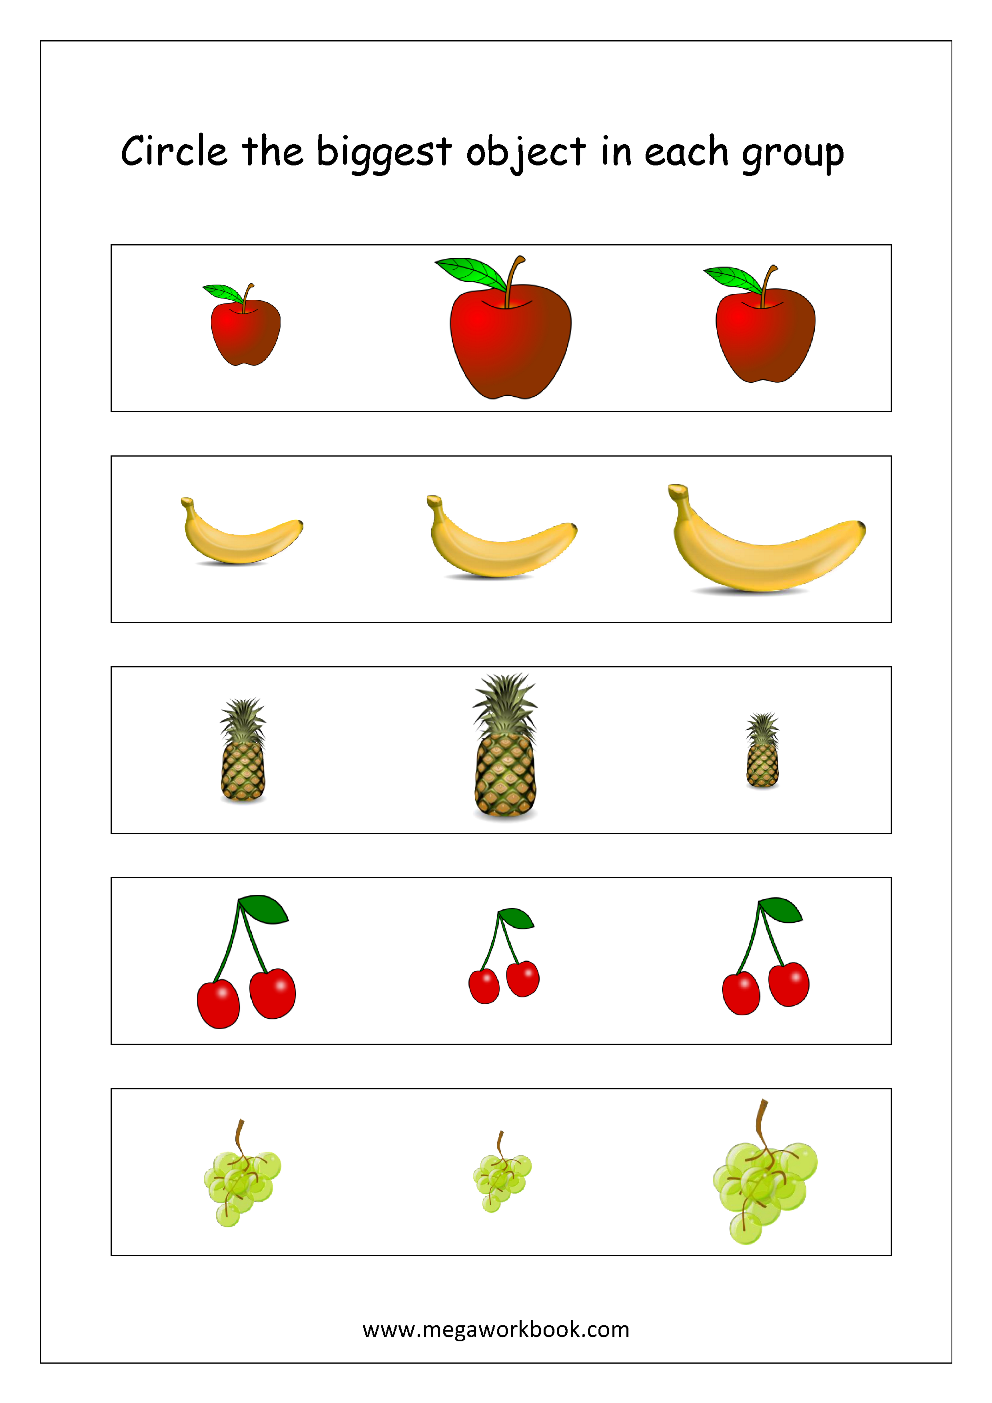 Printable Compare The Objects - Which is Bigger or Smaller